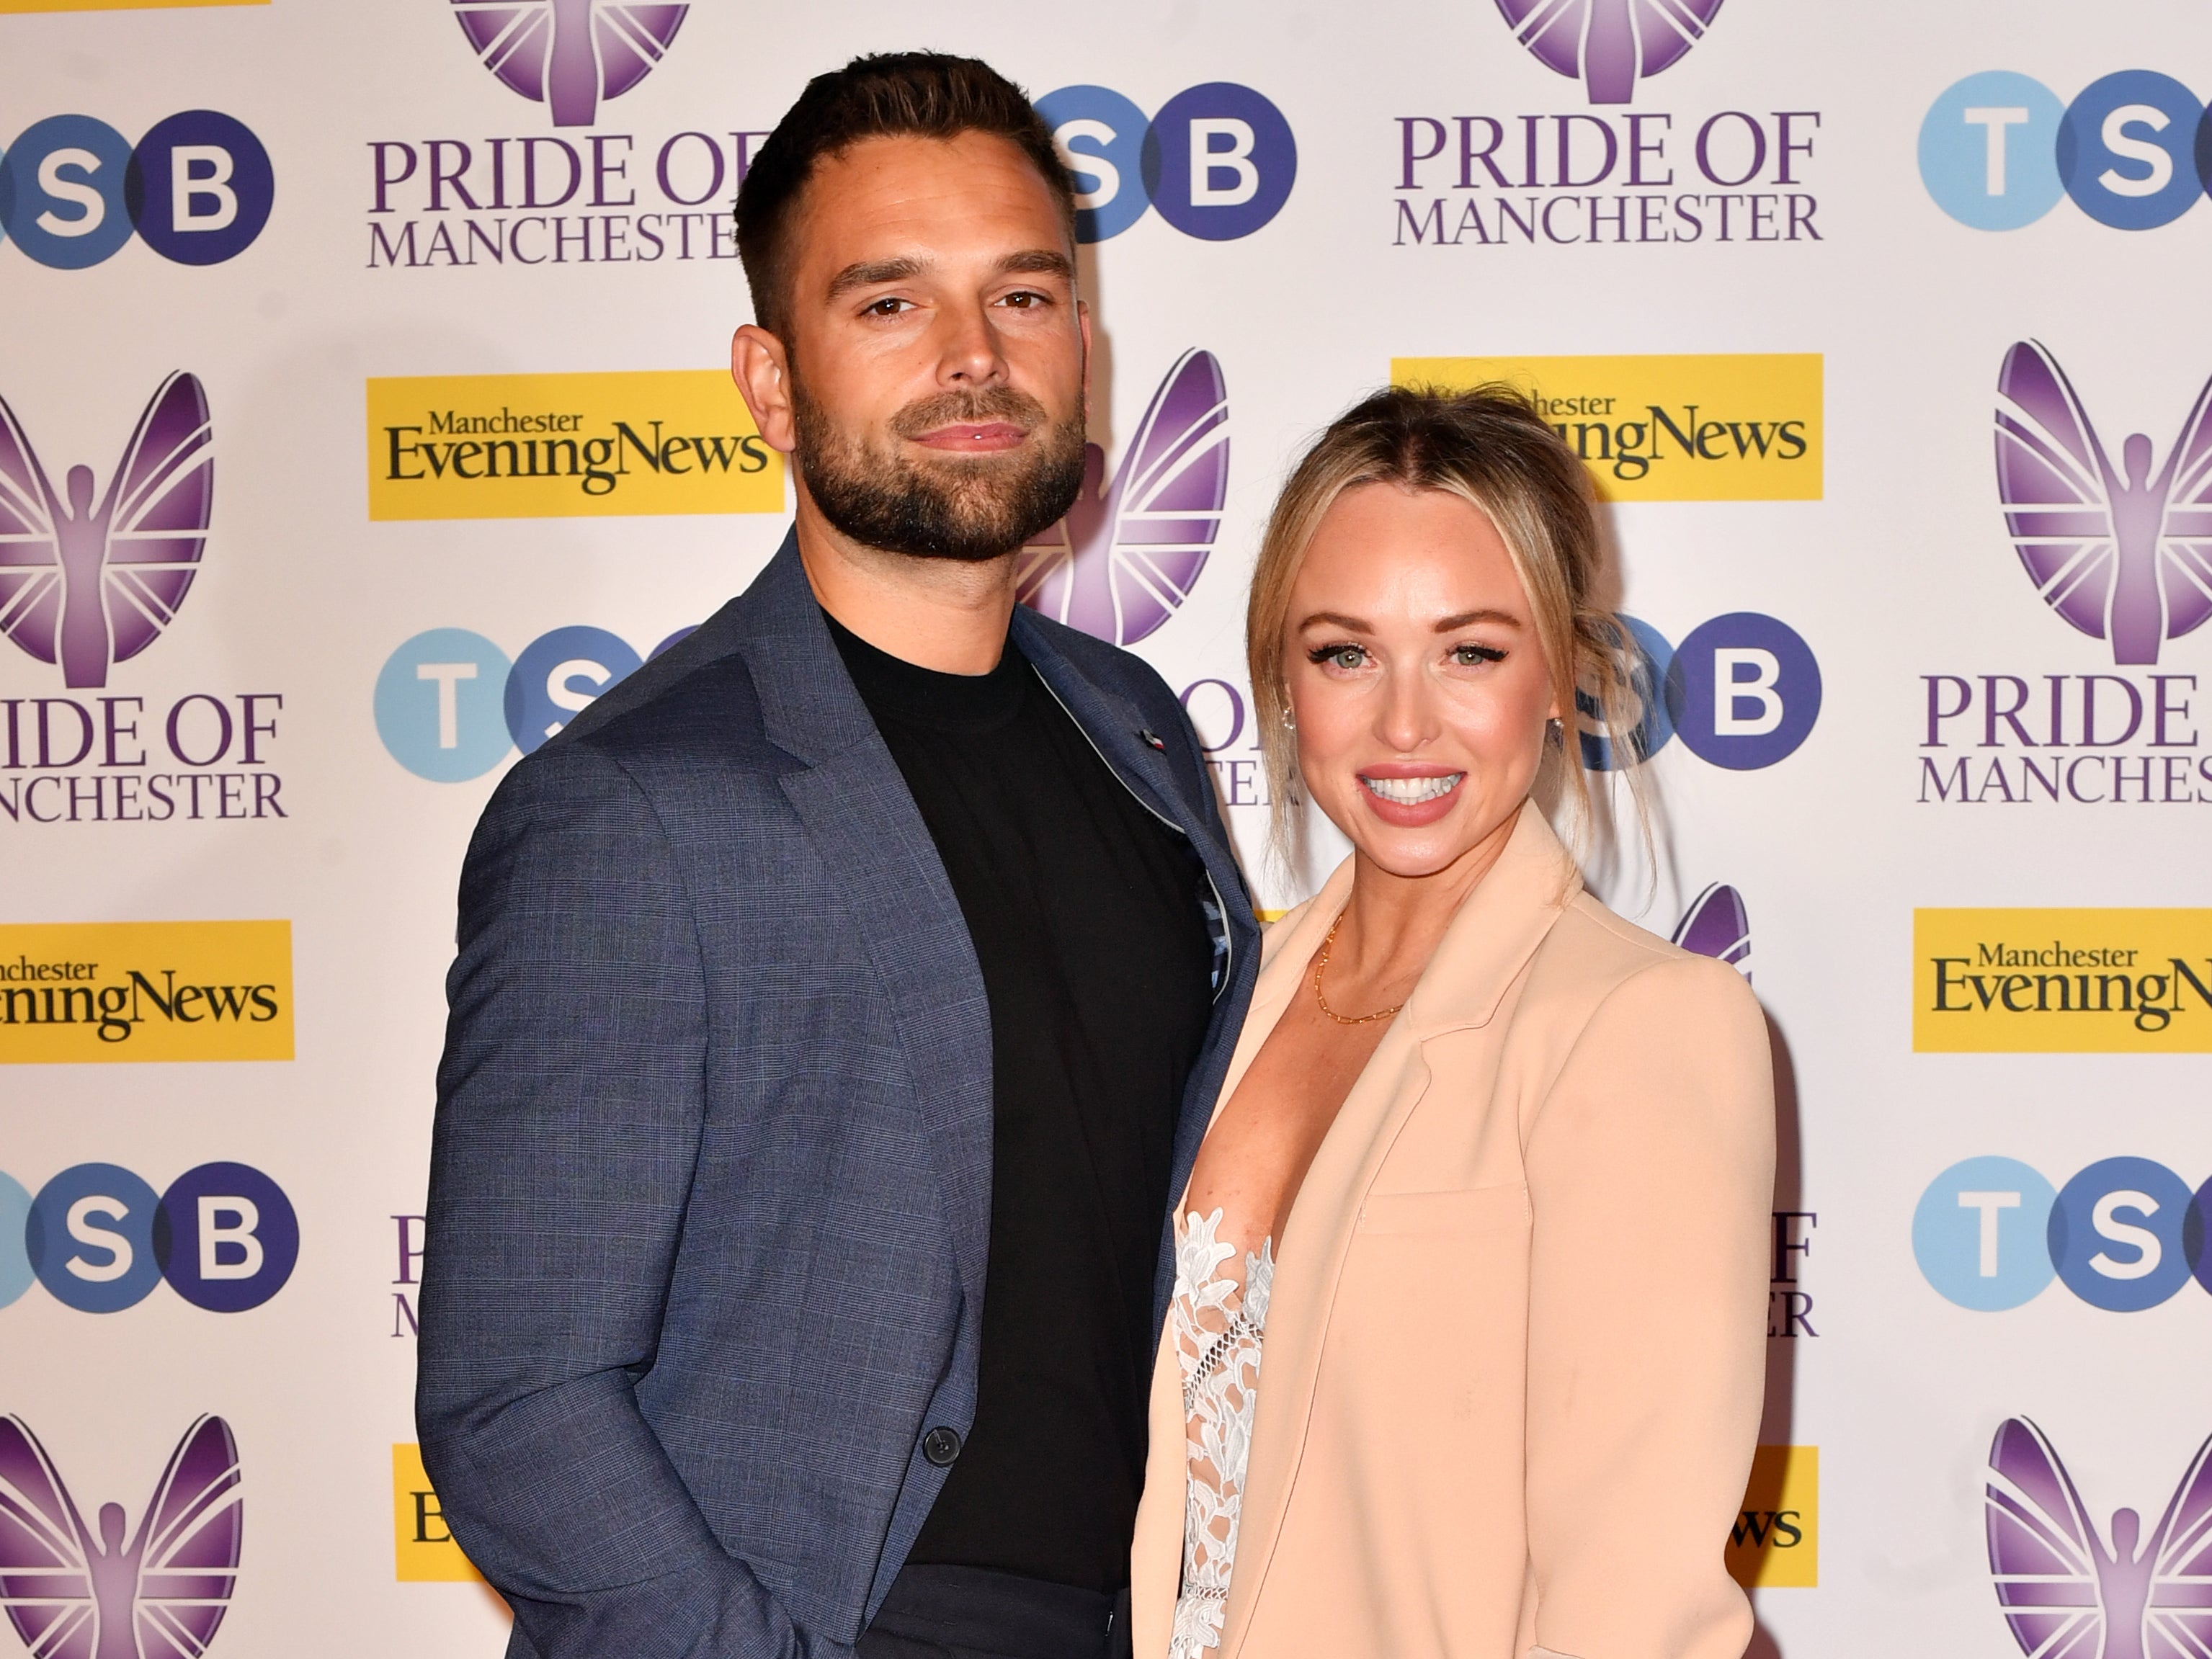 Jorgie Porter (R) and Ollie Piotrowski (L) attend the MEN Pride of Manchester Awards 2022 at Kimpton Clocktower Hotel on May 10, 2022